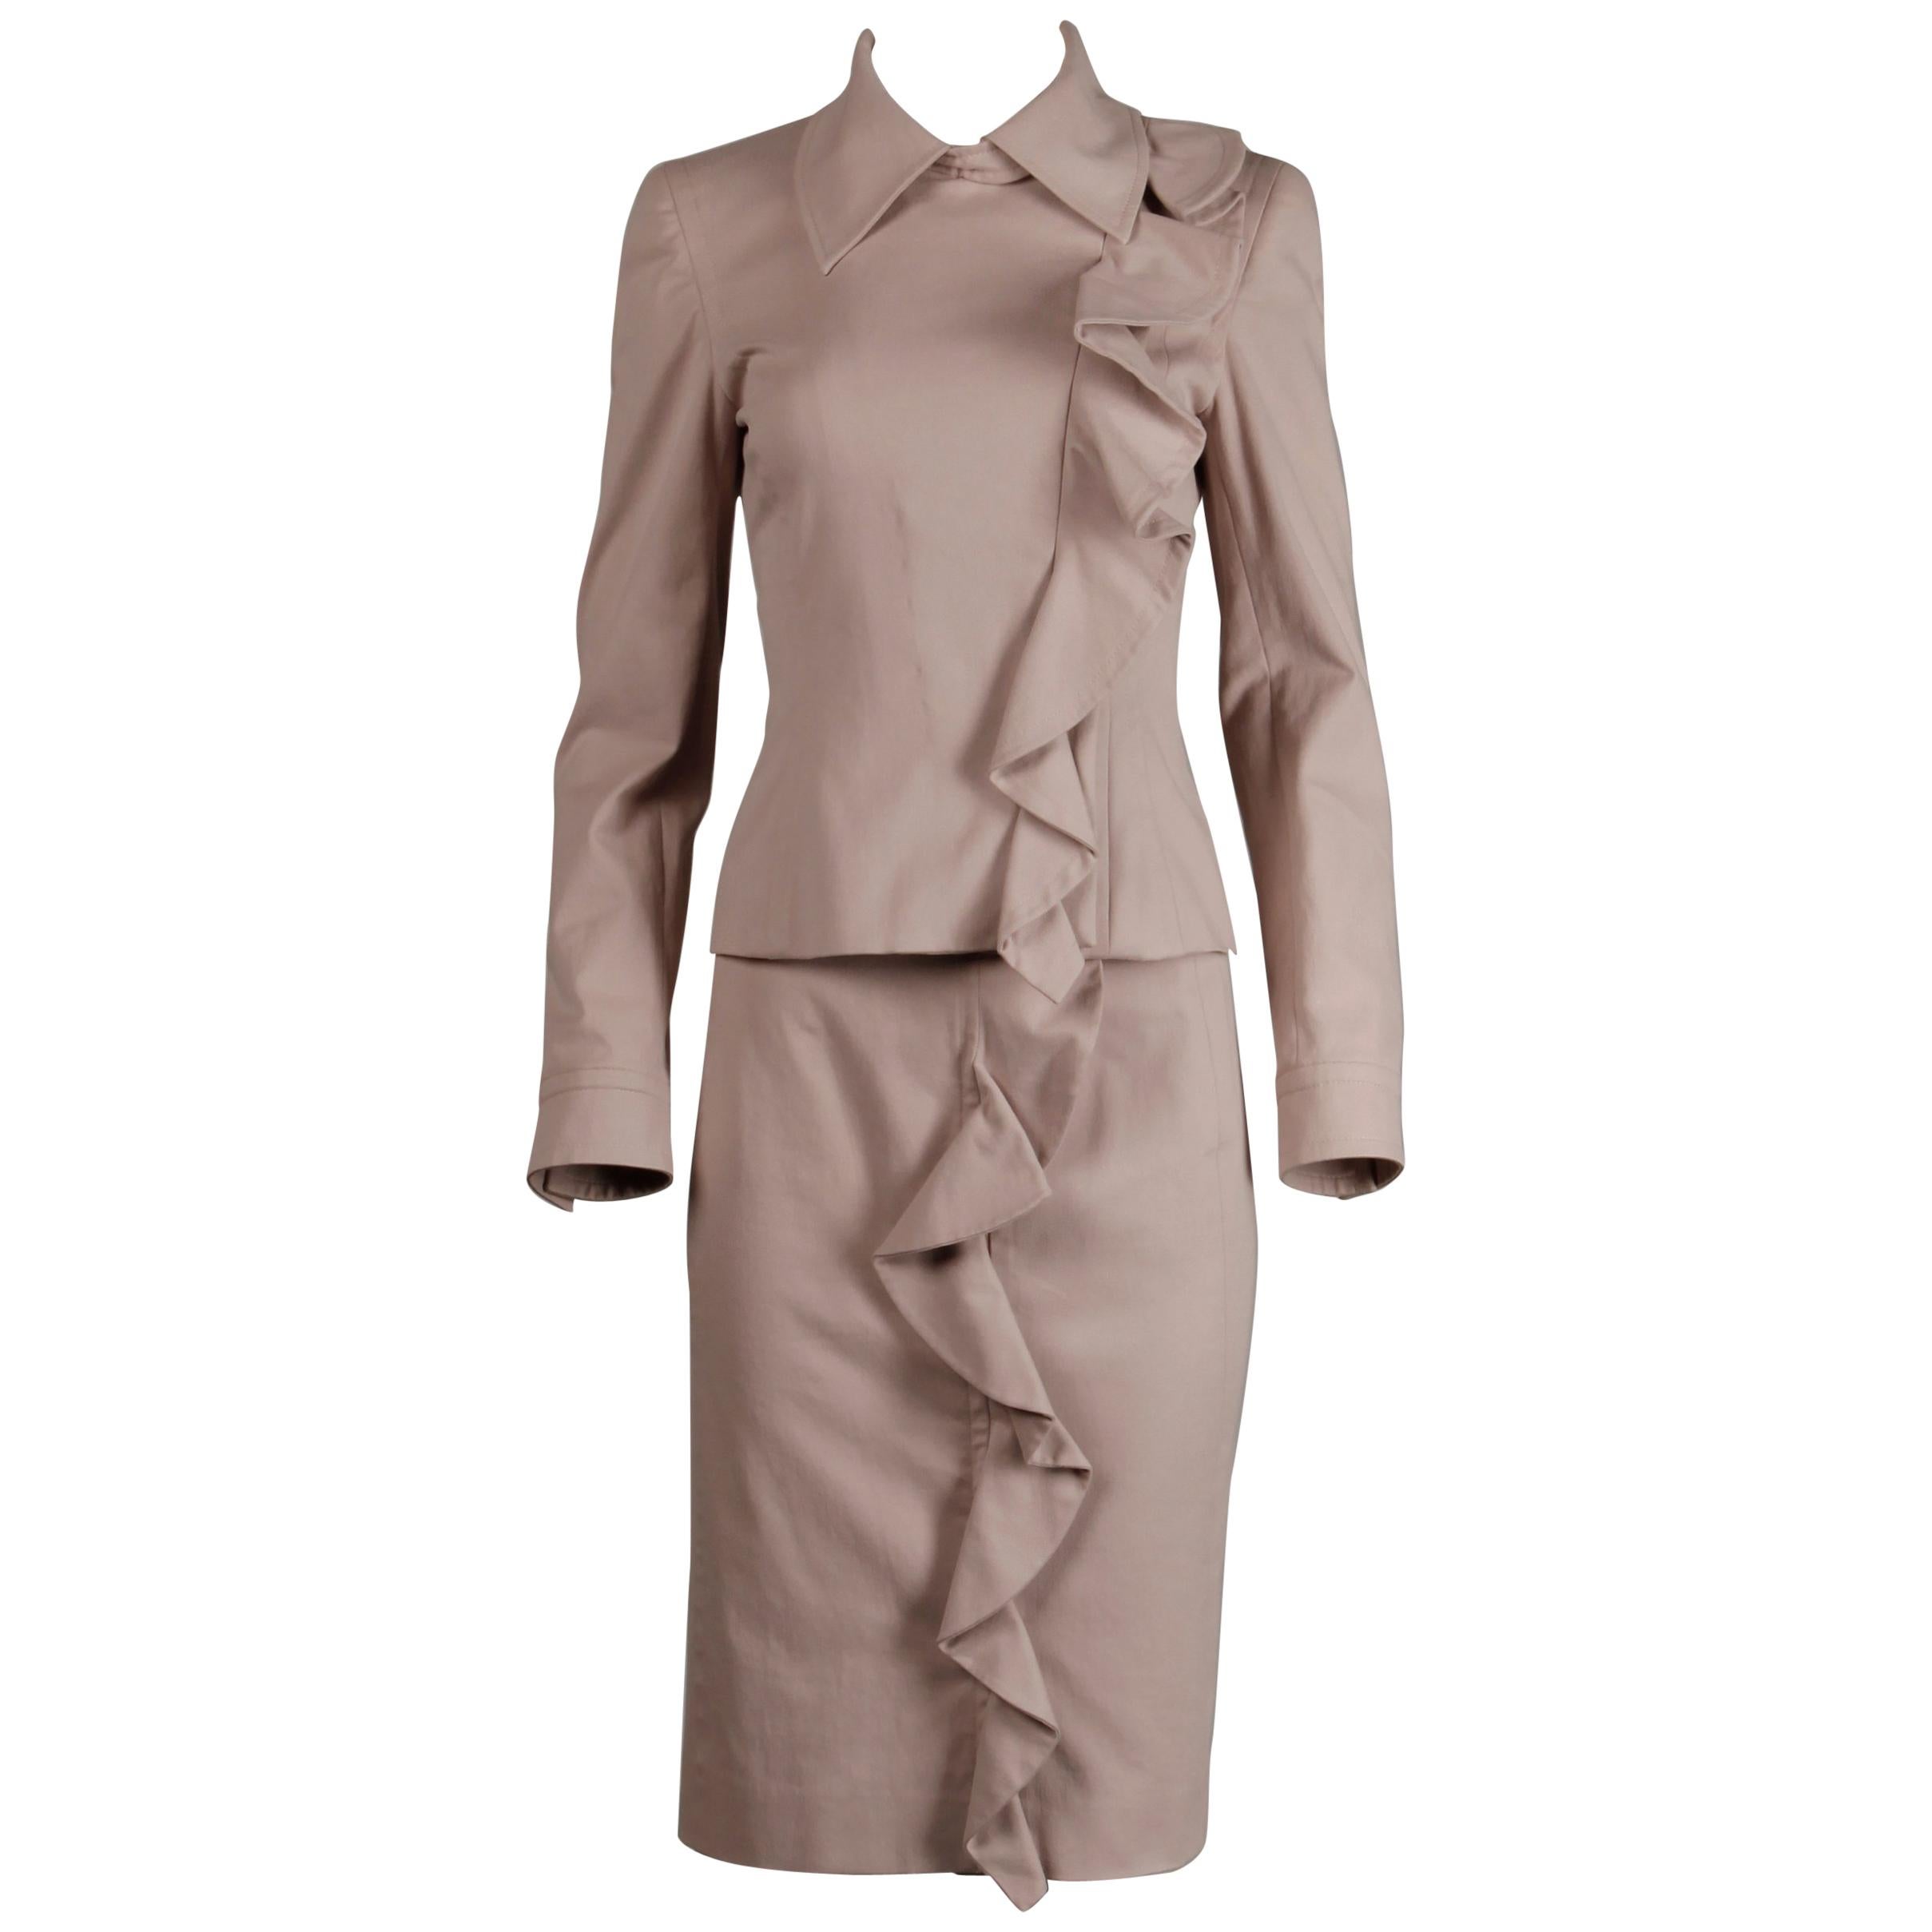 2003 Yves Saint Laurent by Tom Ford Pink Ruffle Jacket + Skirt Suit Ensemble YSL For Sale